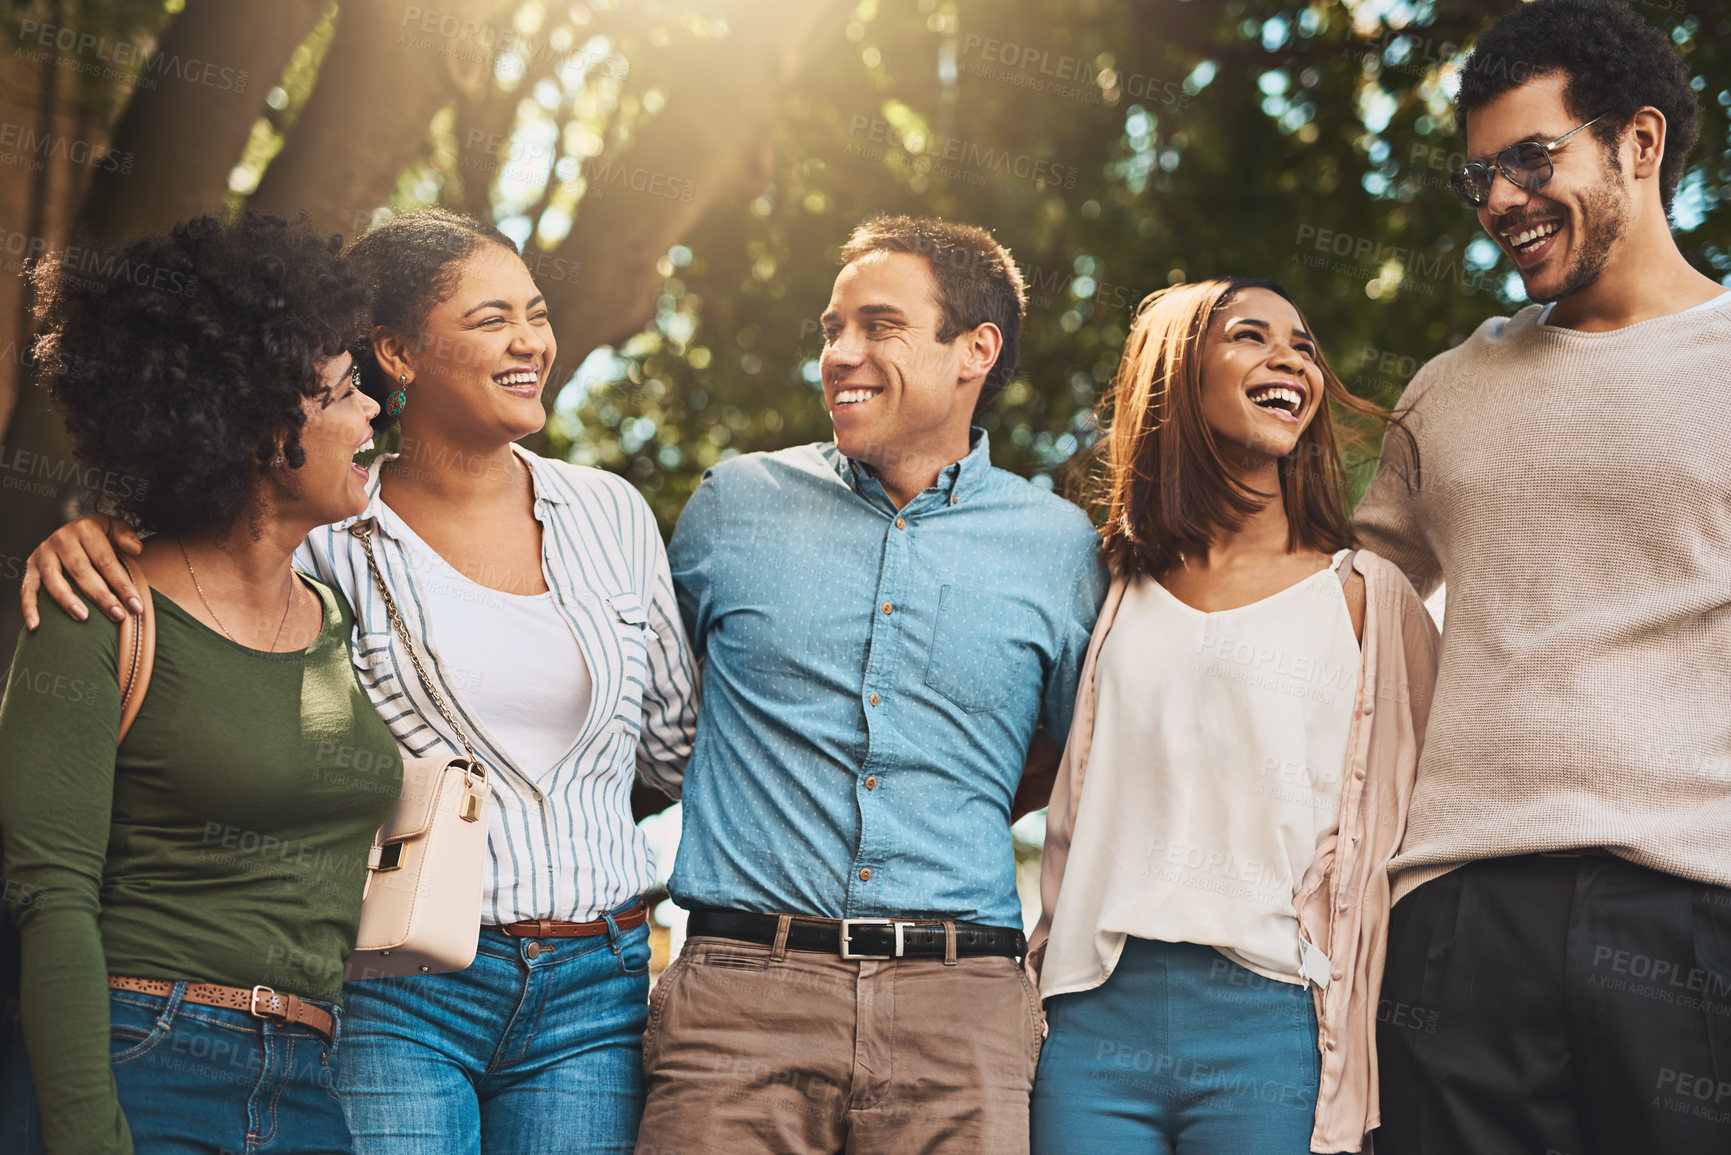 Buy stock photo Shot of a cheerful young group of friends standing together while looking at the camera outside during the day